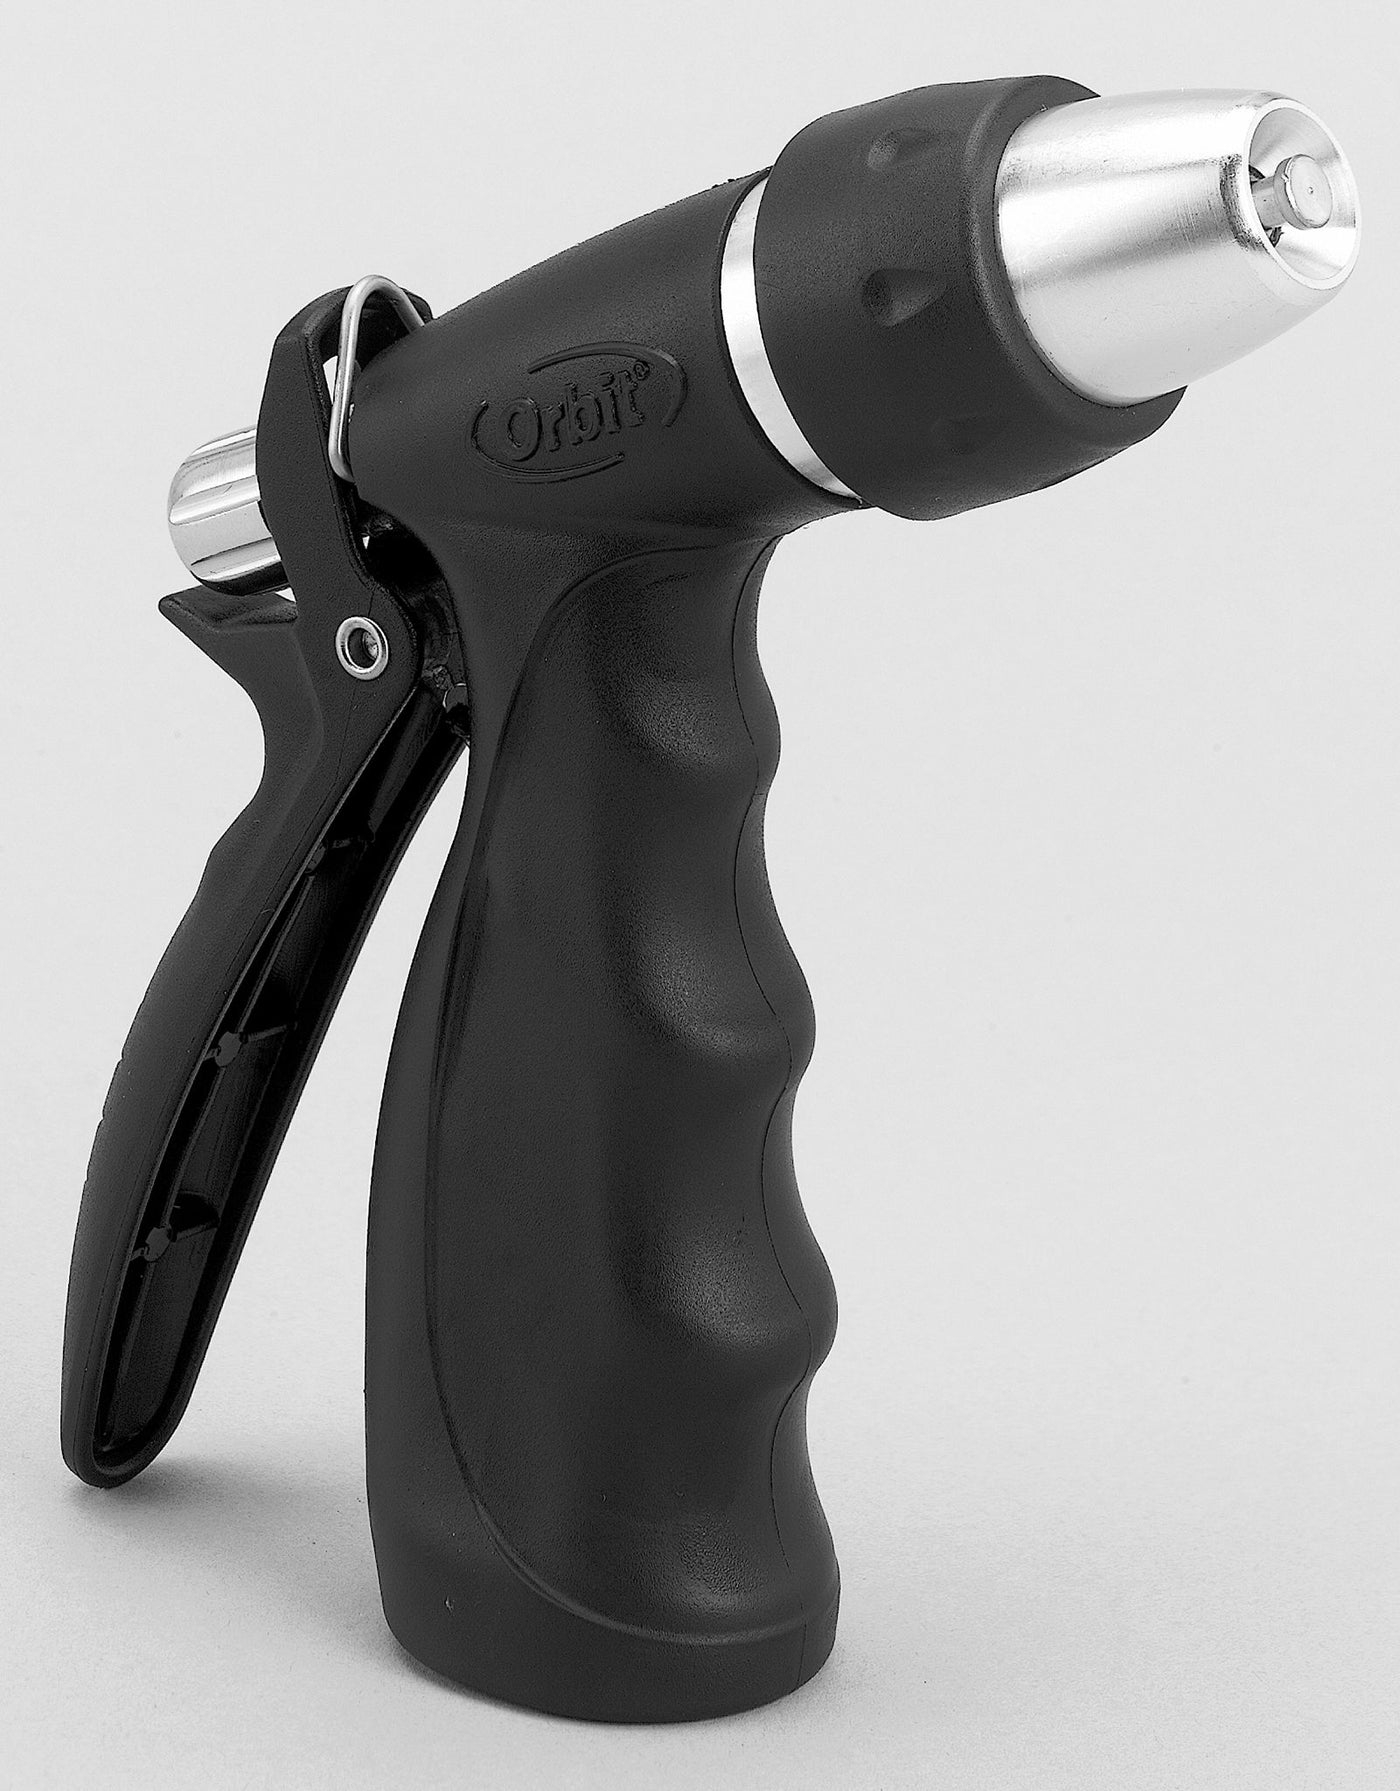 Ultralight adjustable spray rear trigger hose watering nozzle with rubberized non-slip grip.